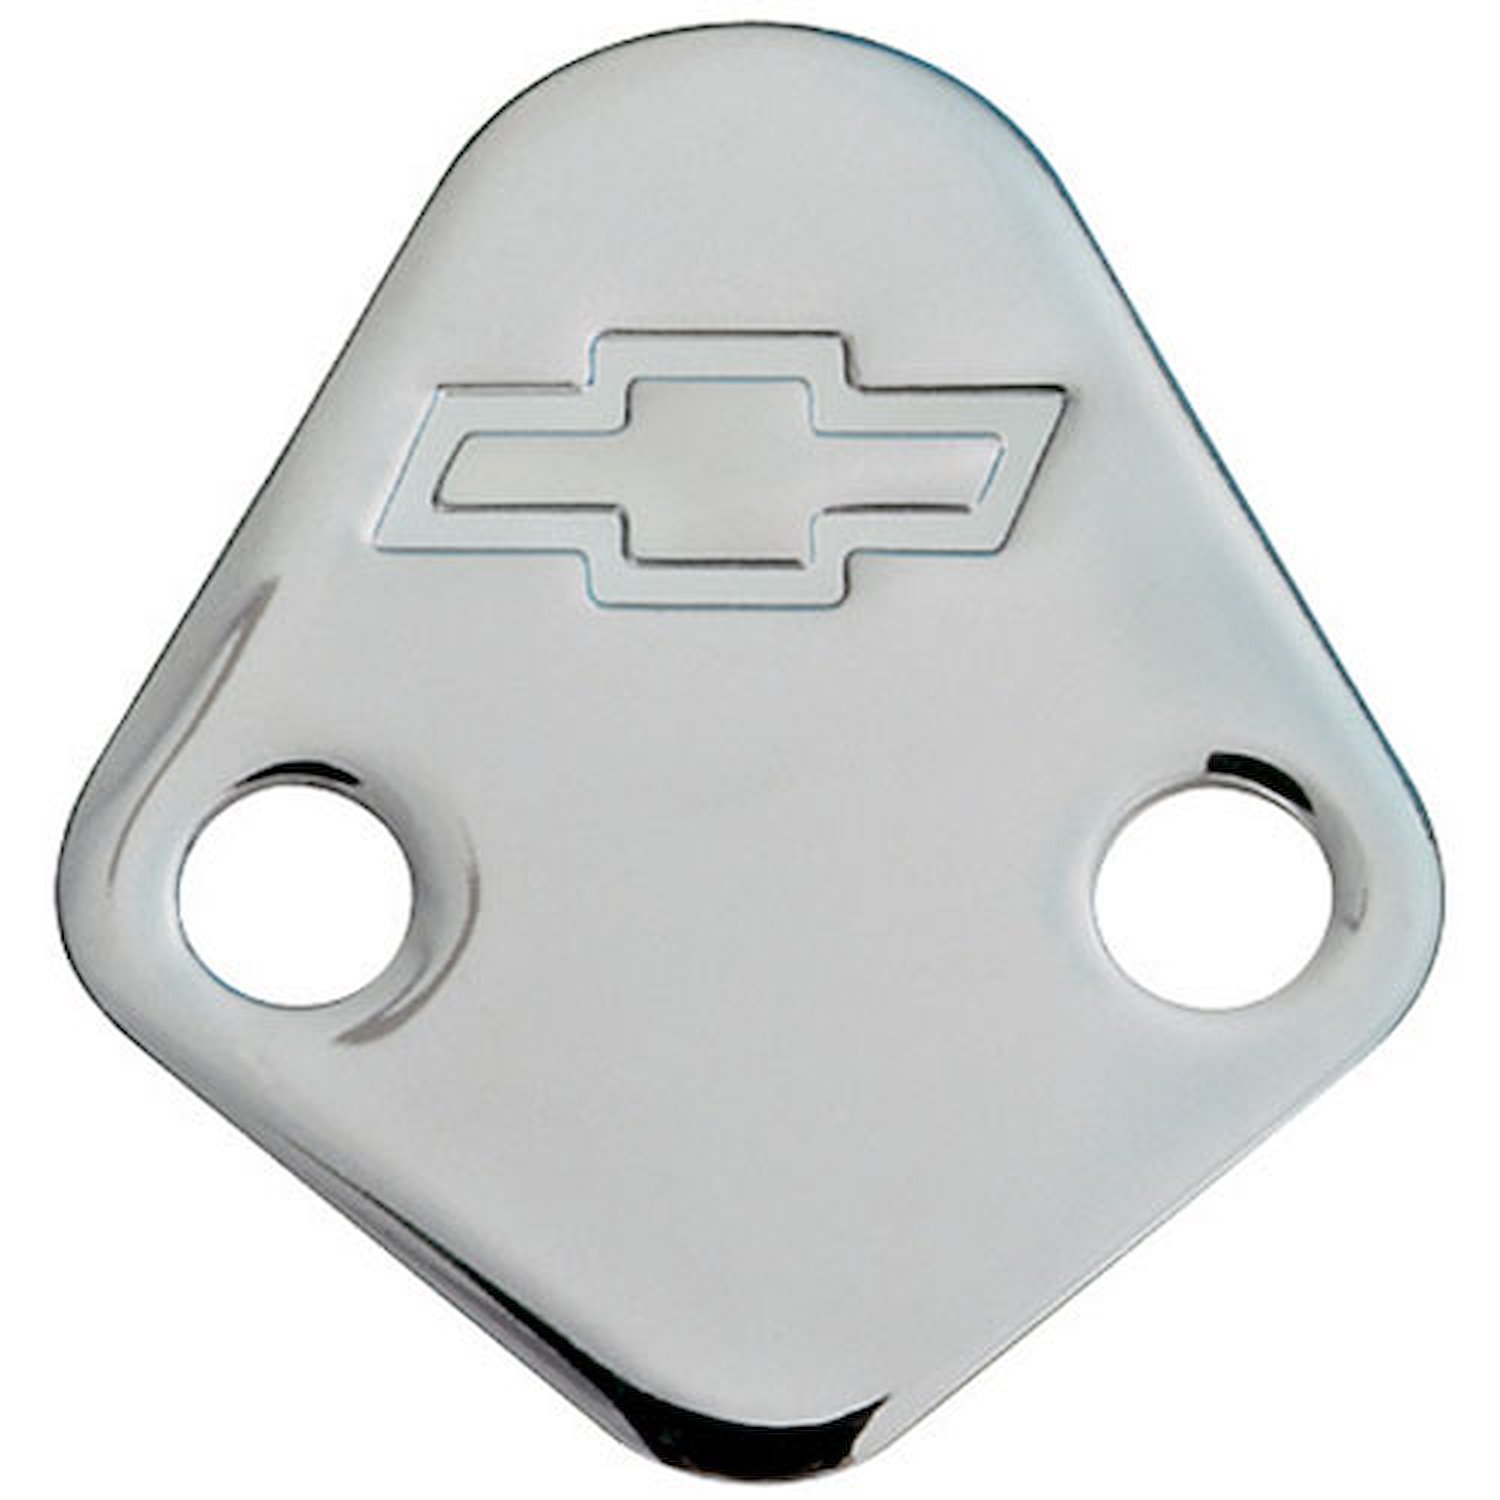 Bowtie Fuel Pump Block-Off Plate for Big Block Chevy in Chrome